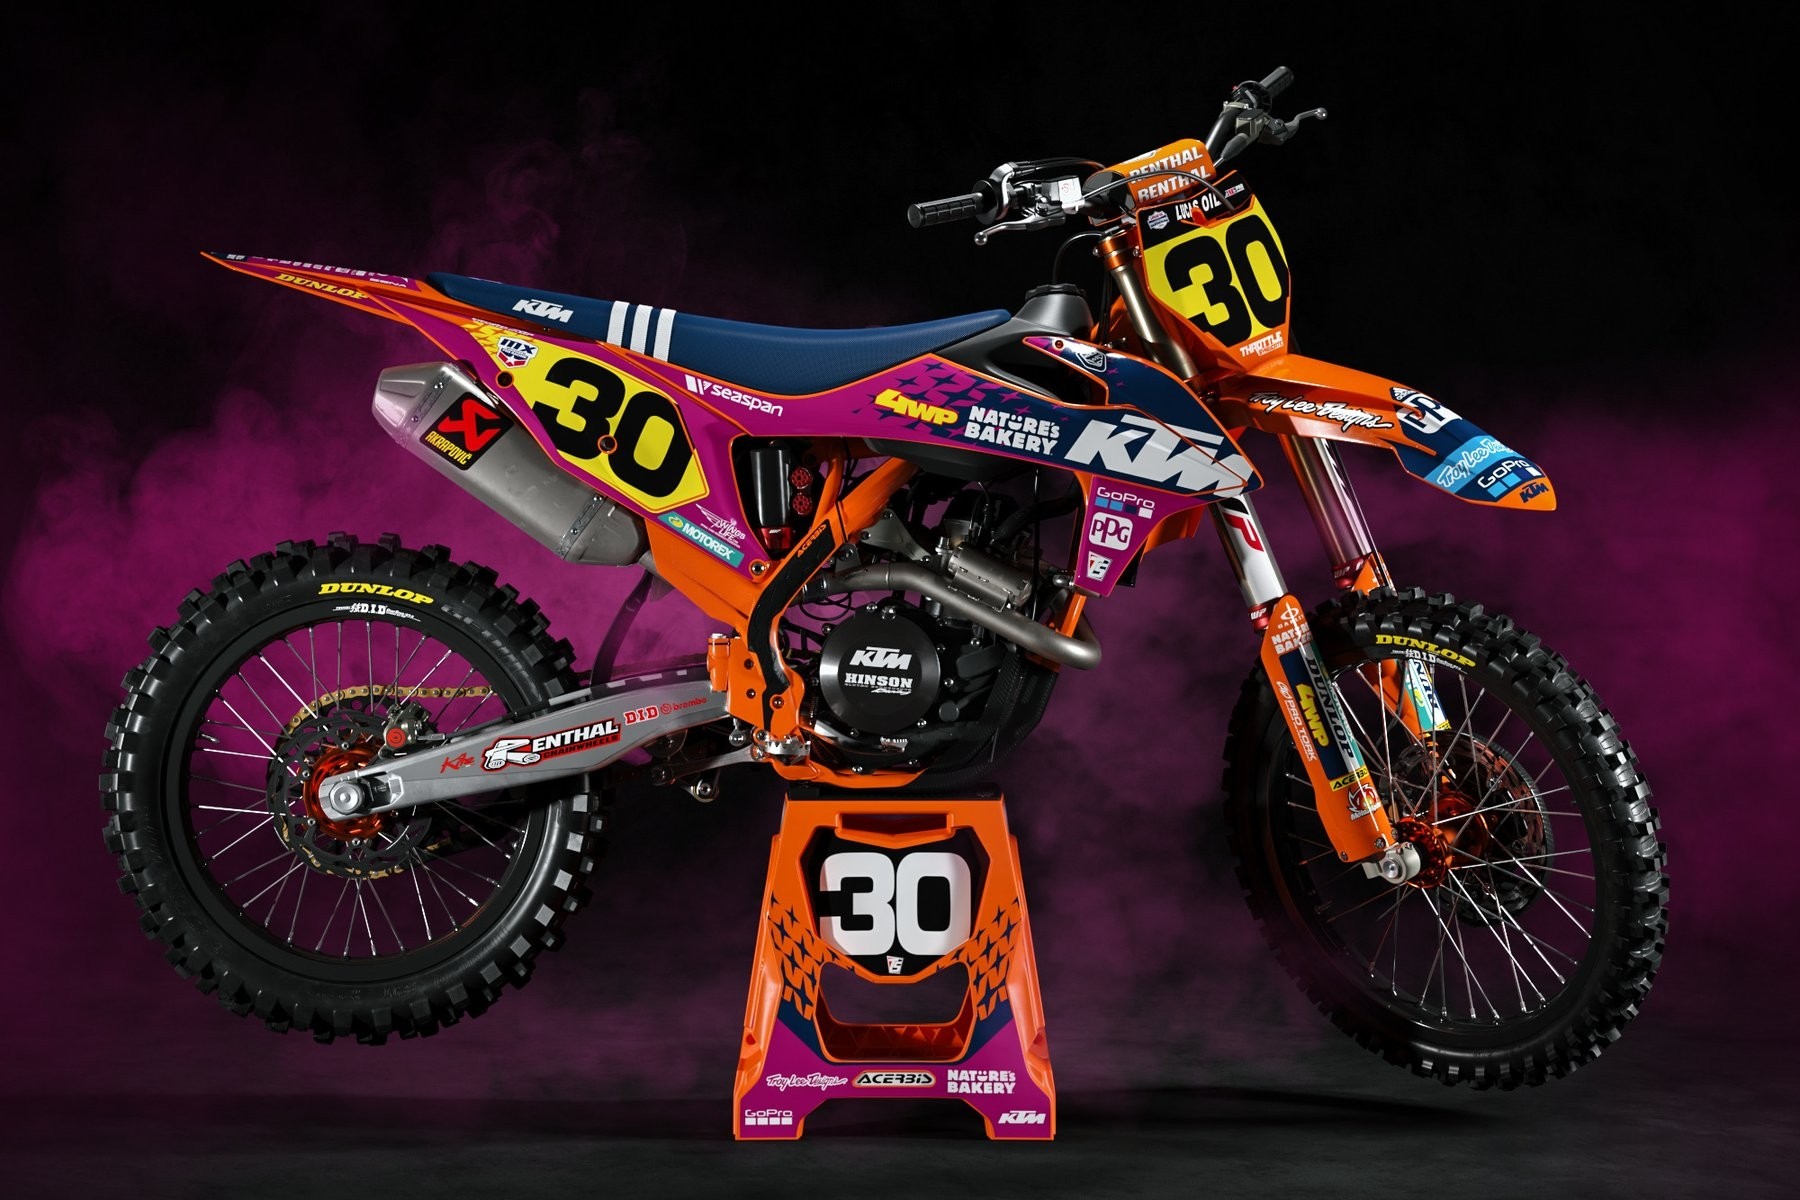 2020 KTM TLD Cosmic Jungle Limited Edition